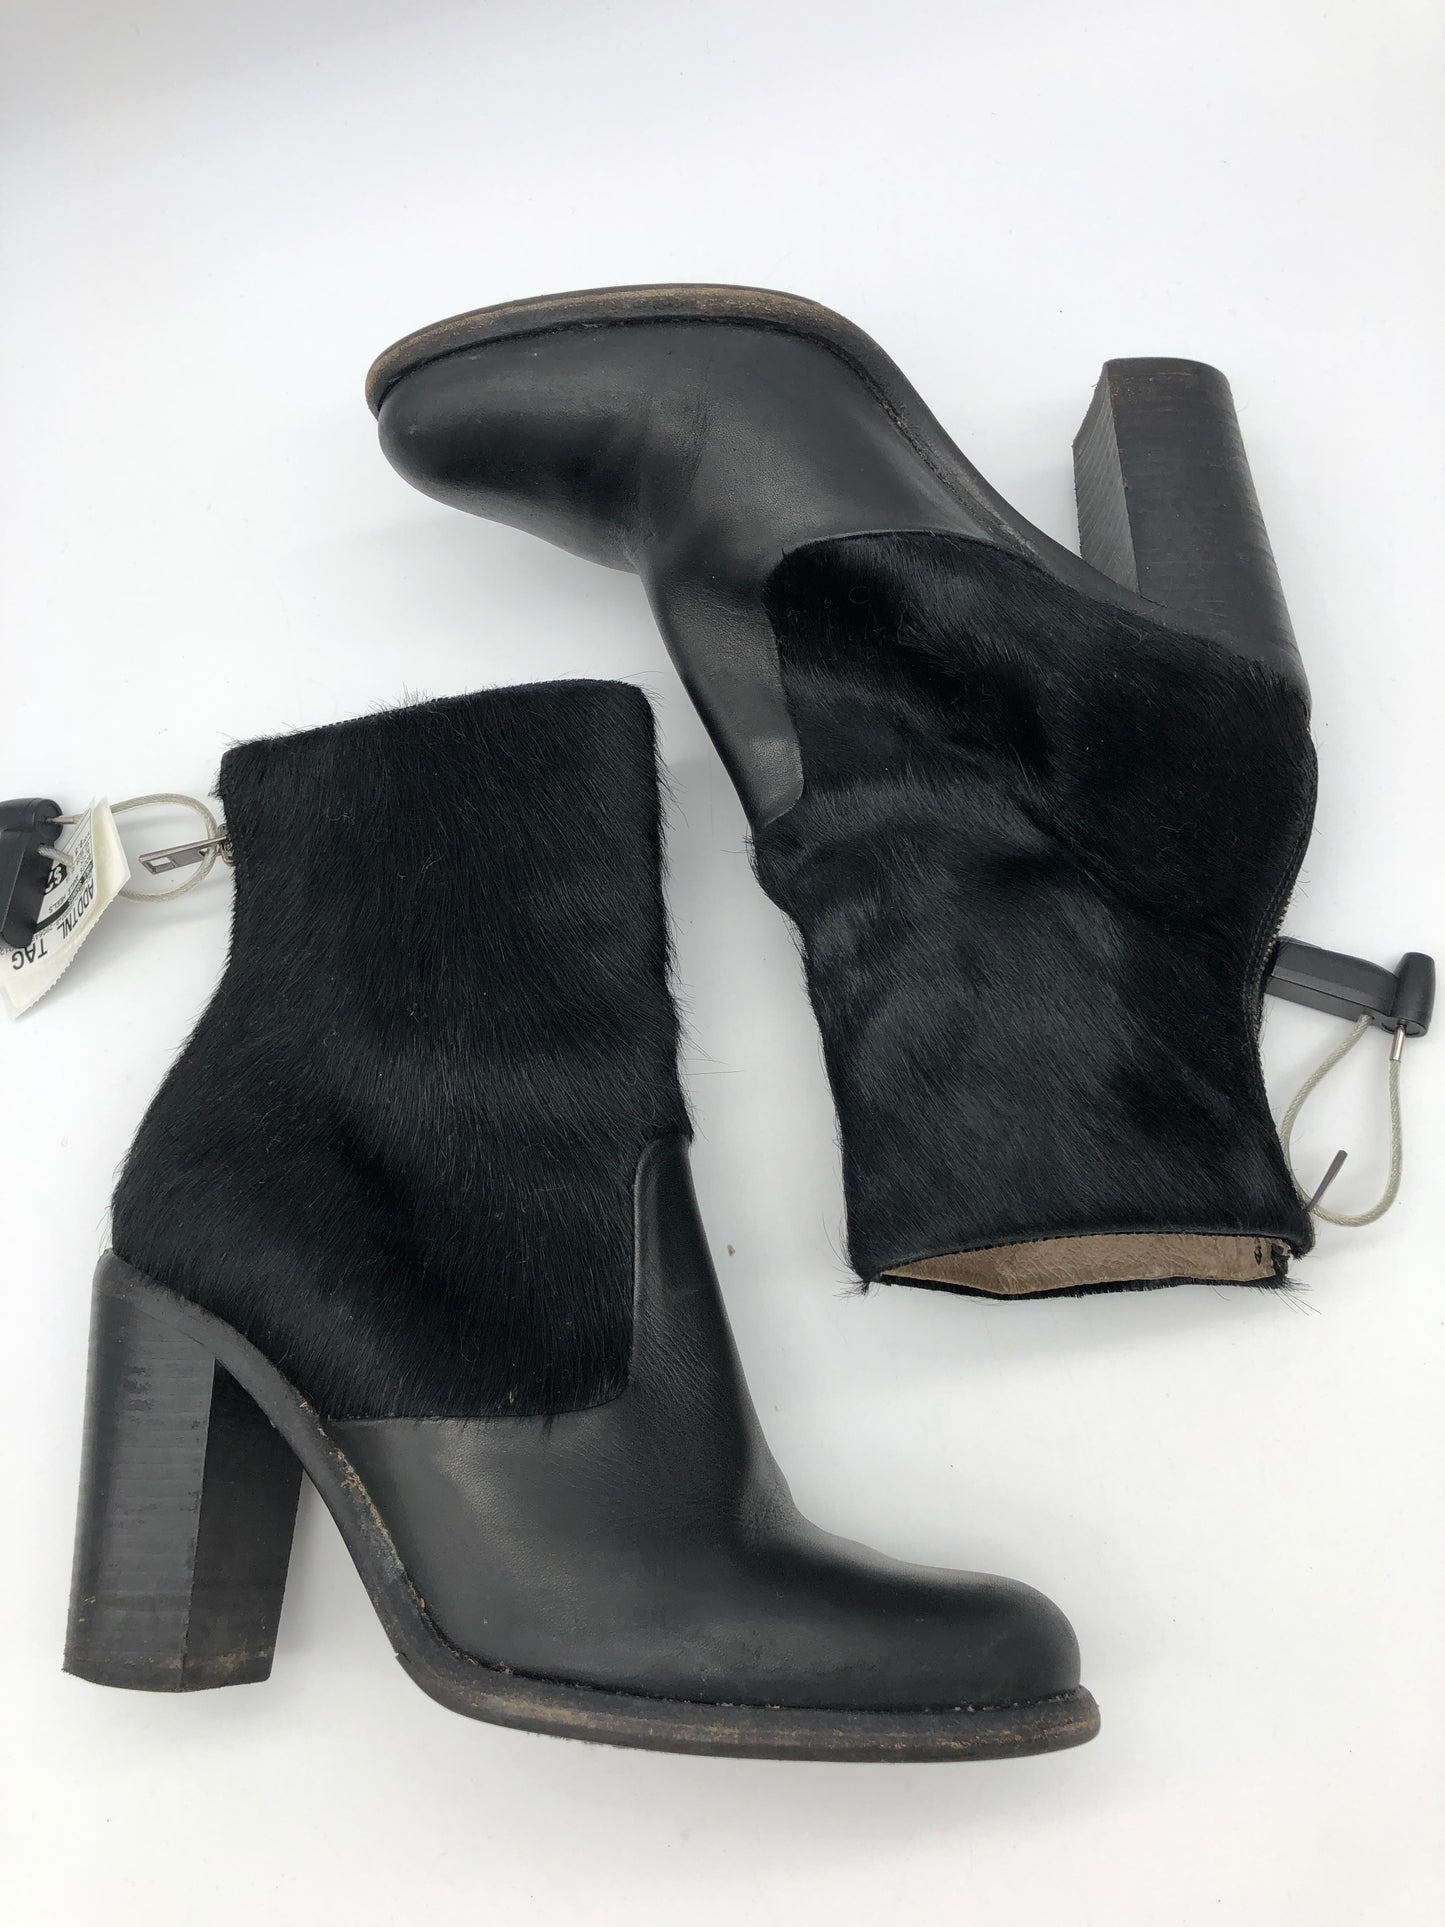 Boots Ankle Heels By All Saints  Size: 9.5